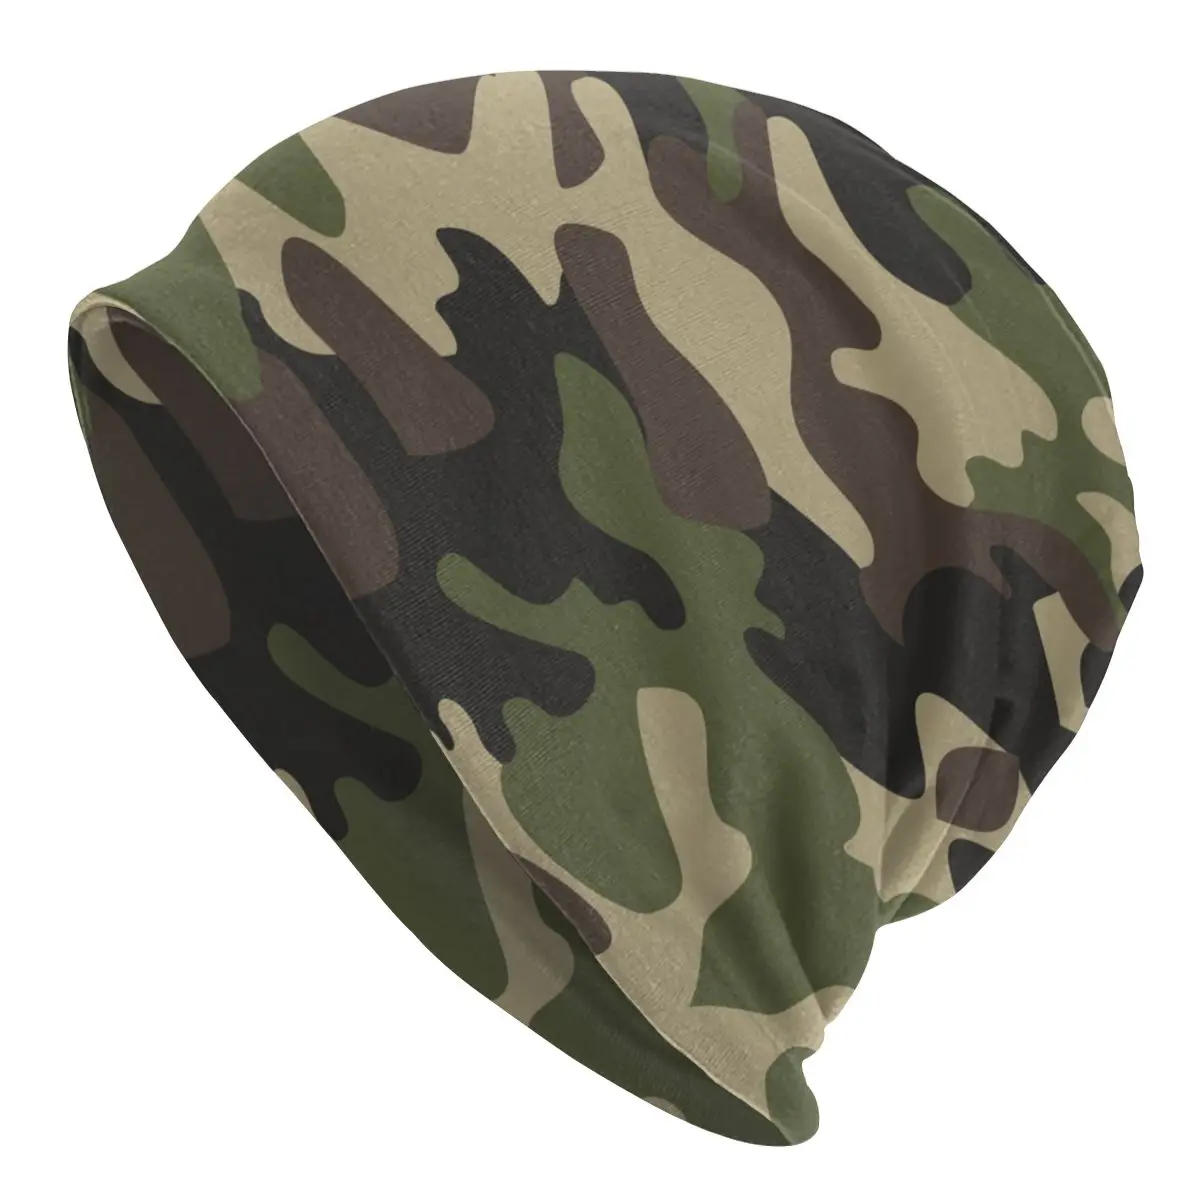 

Green Brown Military Camouflage Slouchy Beanie Hat Women Men Army Jungle Camo Fashion Knit Skullies Beanies Caps for Outdoor Ski